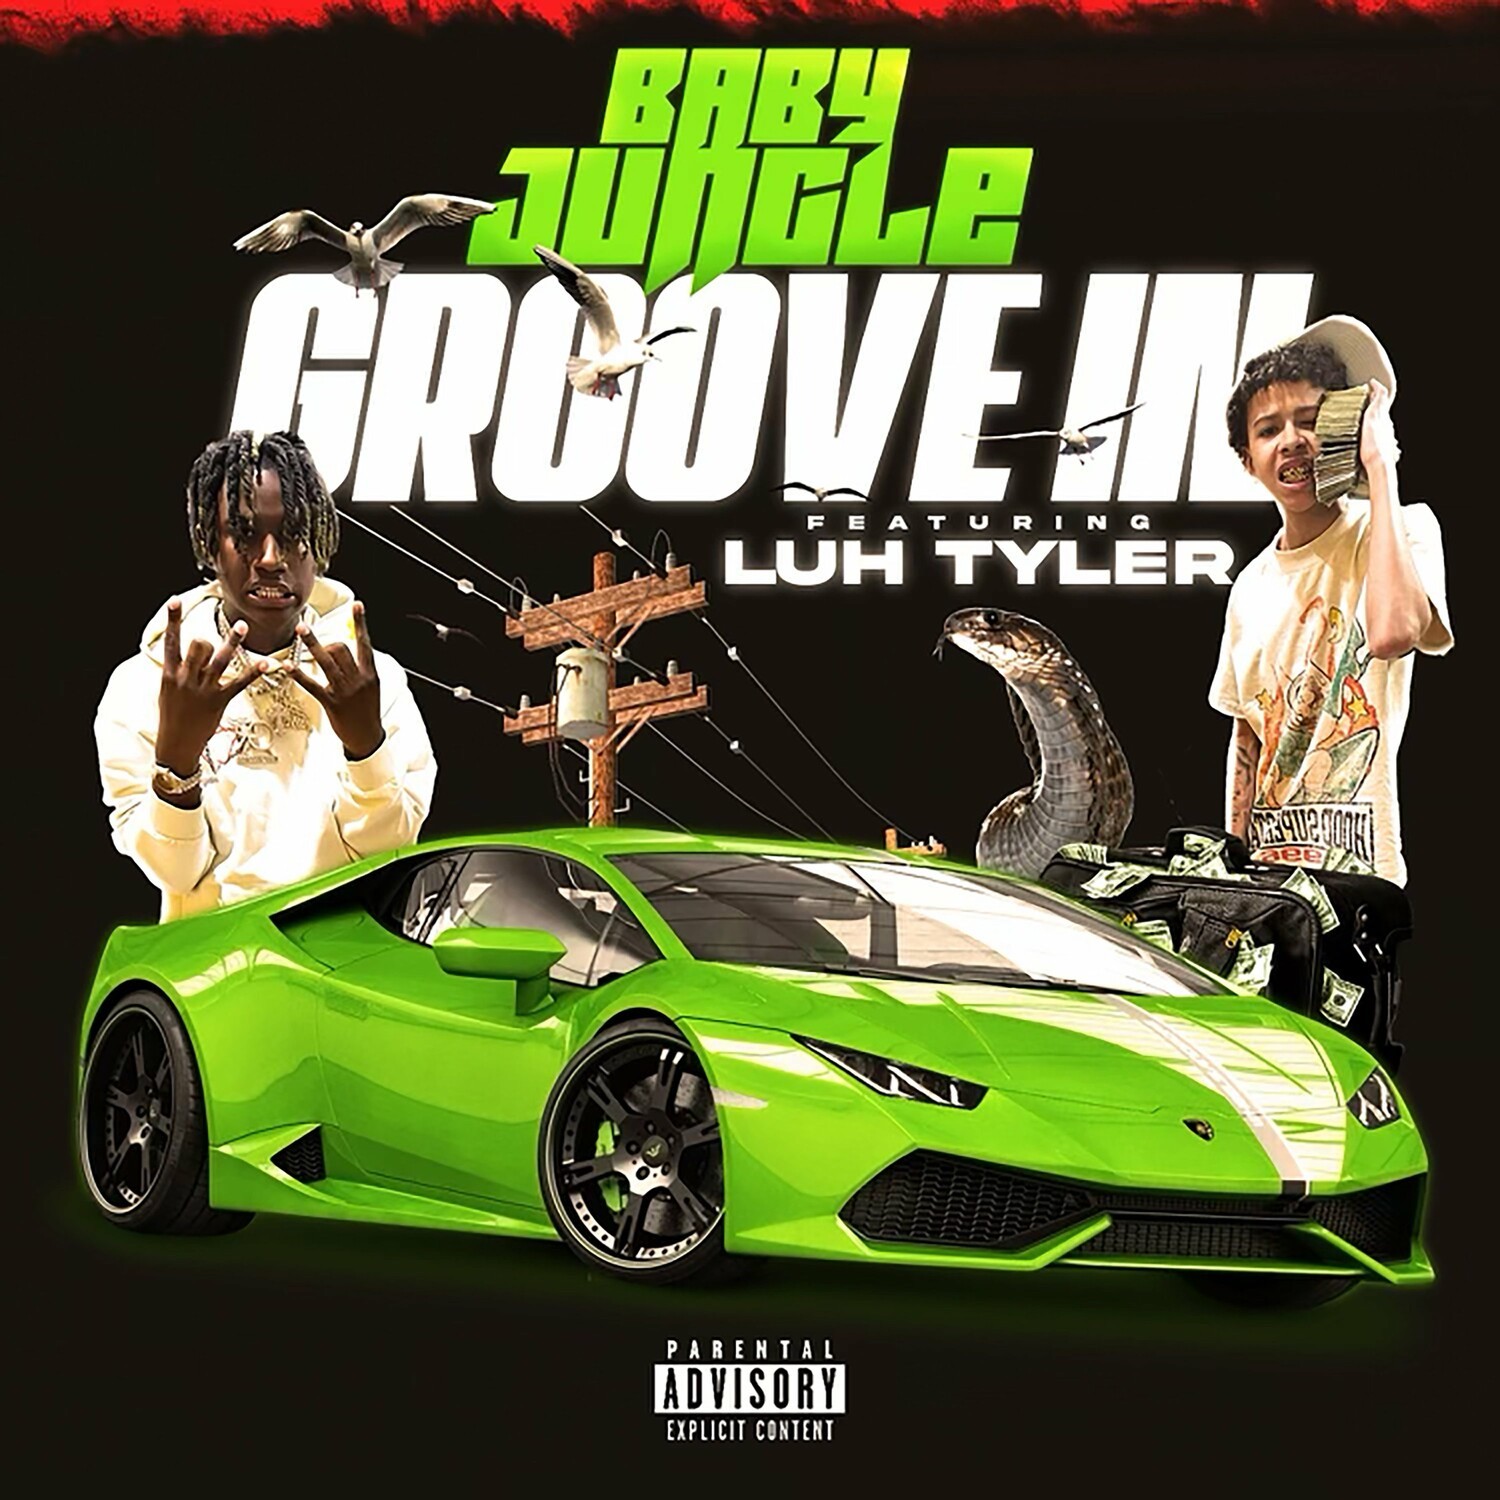 Art for Groove in (Dirty) by Baby Jungle & Luh Tyler